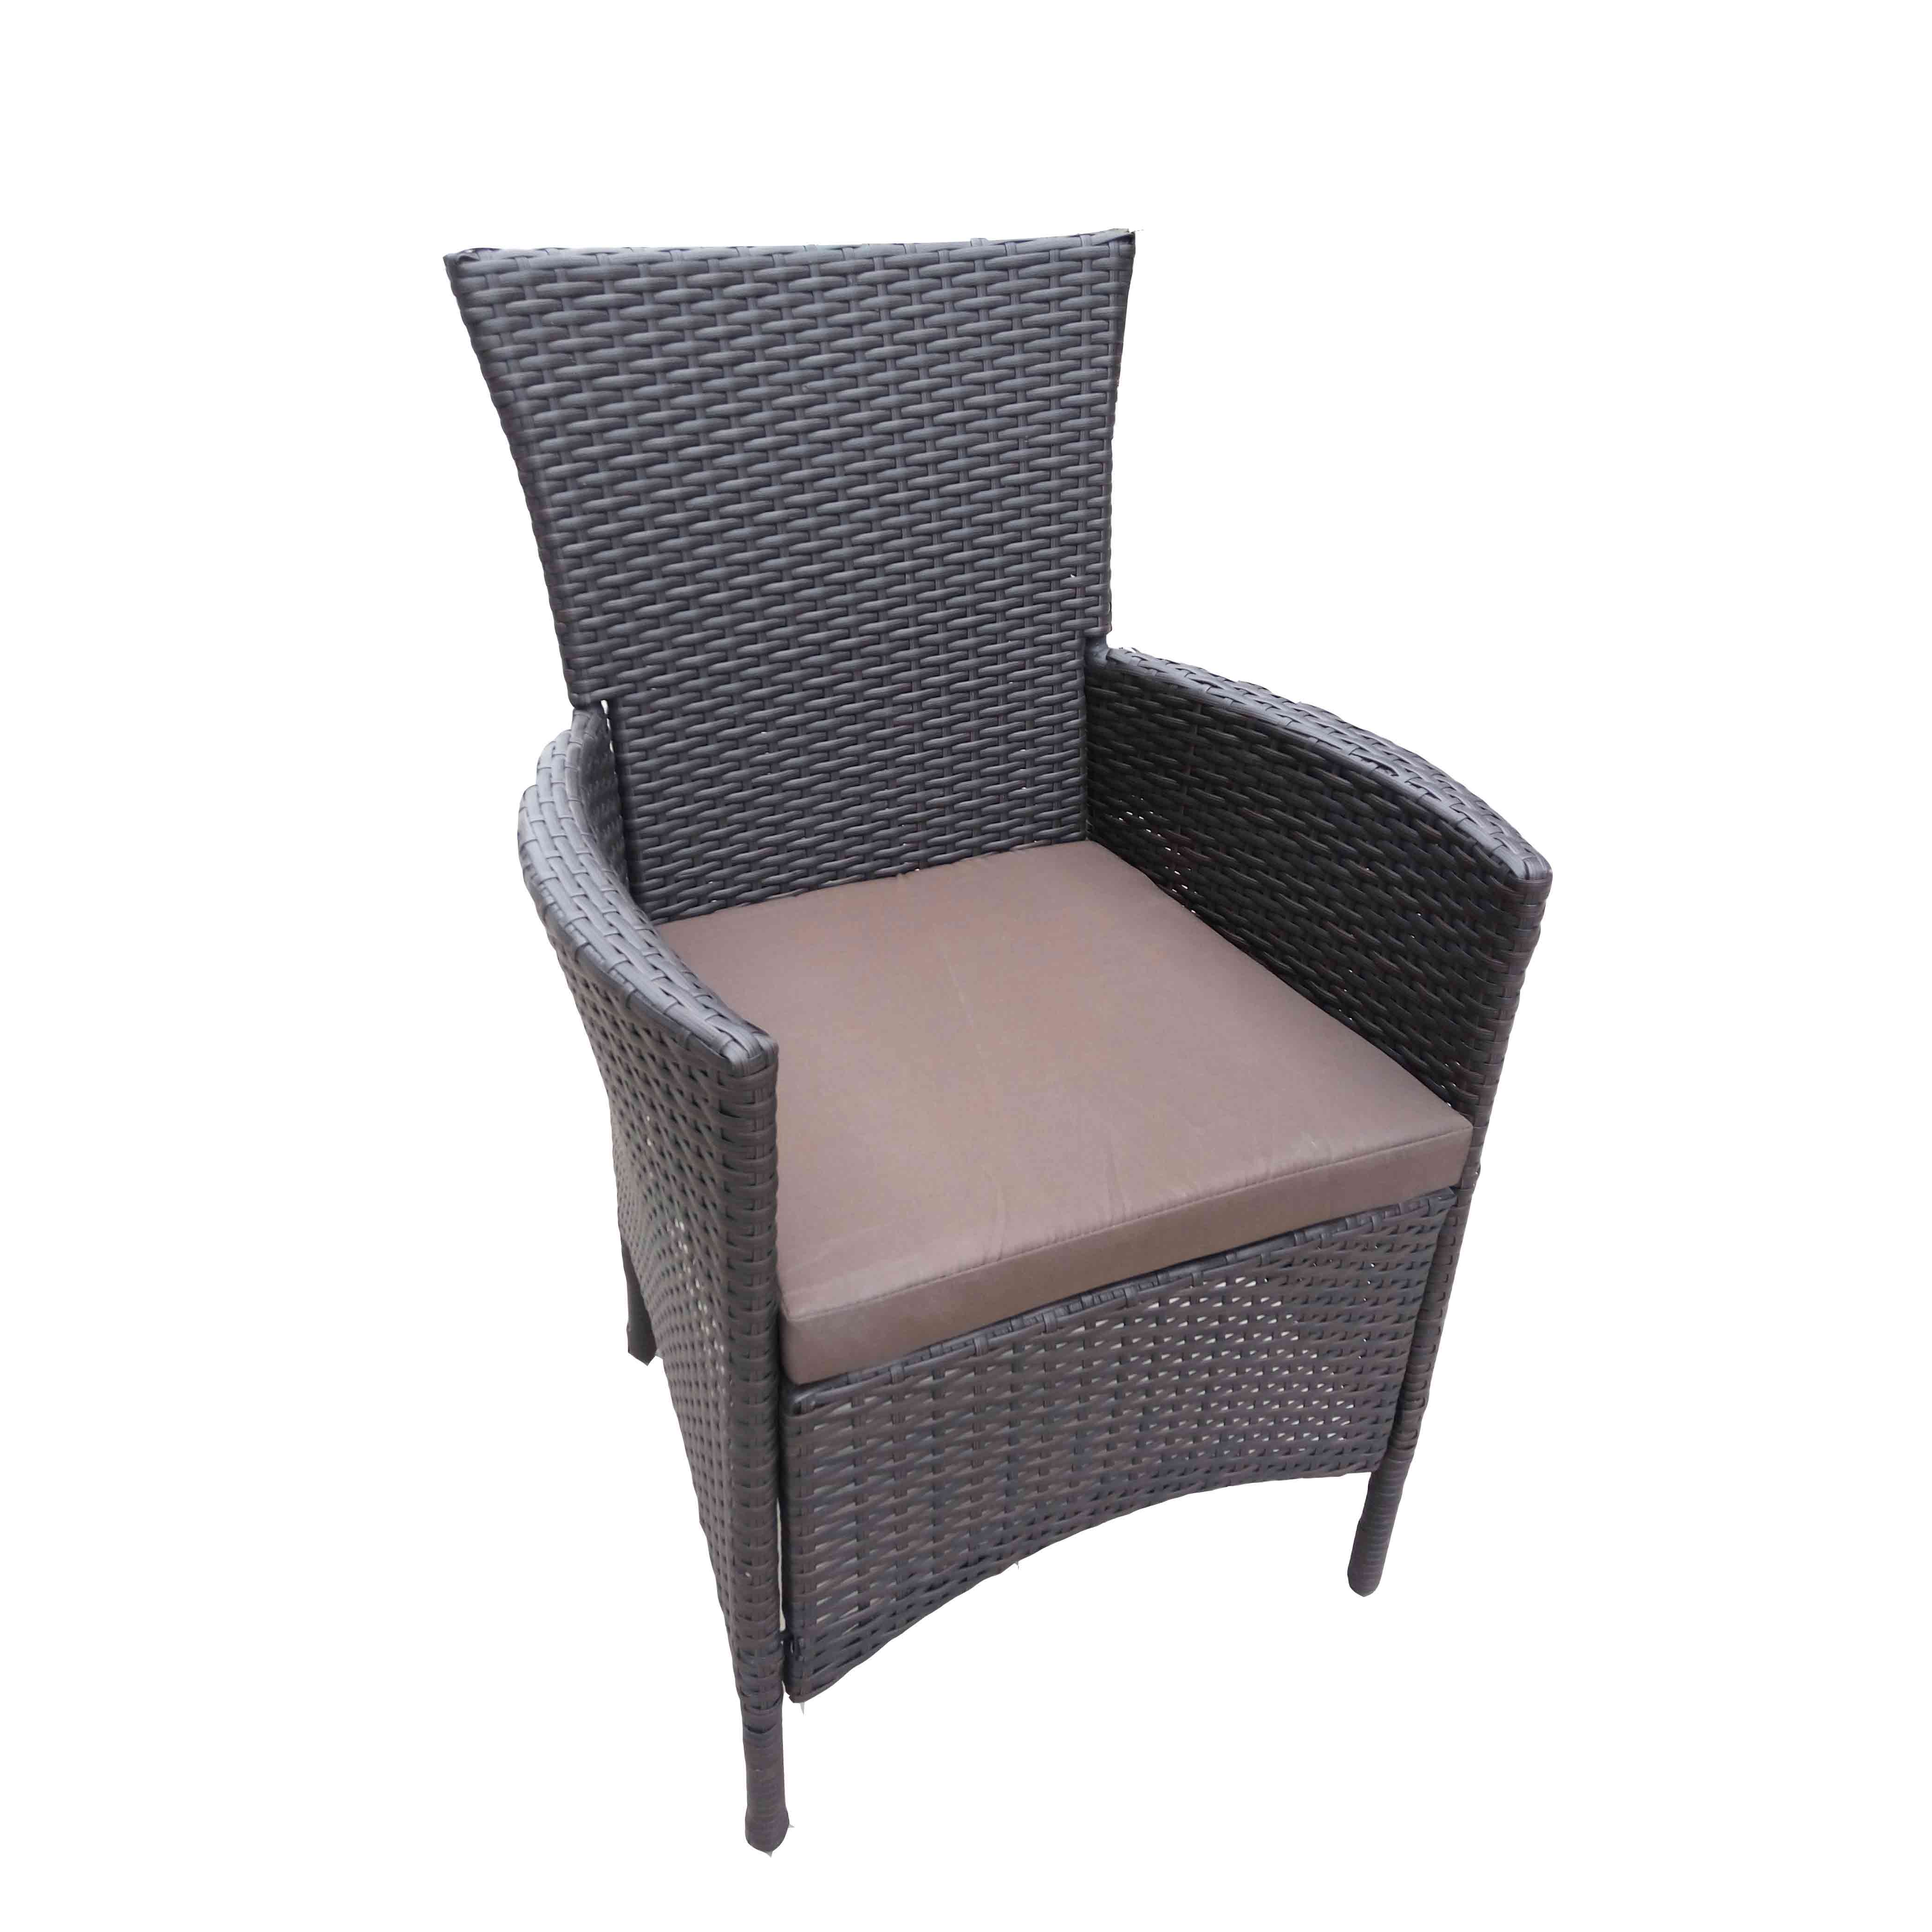 Famous Discount Poly Rattan Wicker Outdoor Chair Pricelist - JJC3005 Steel Frame Stacking Wicker dinning Chair – Jin-jiang Industry